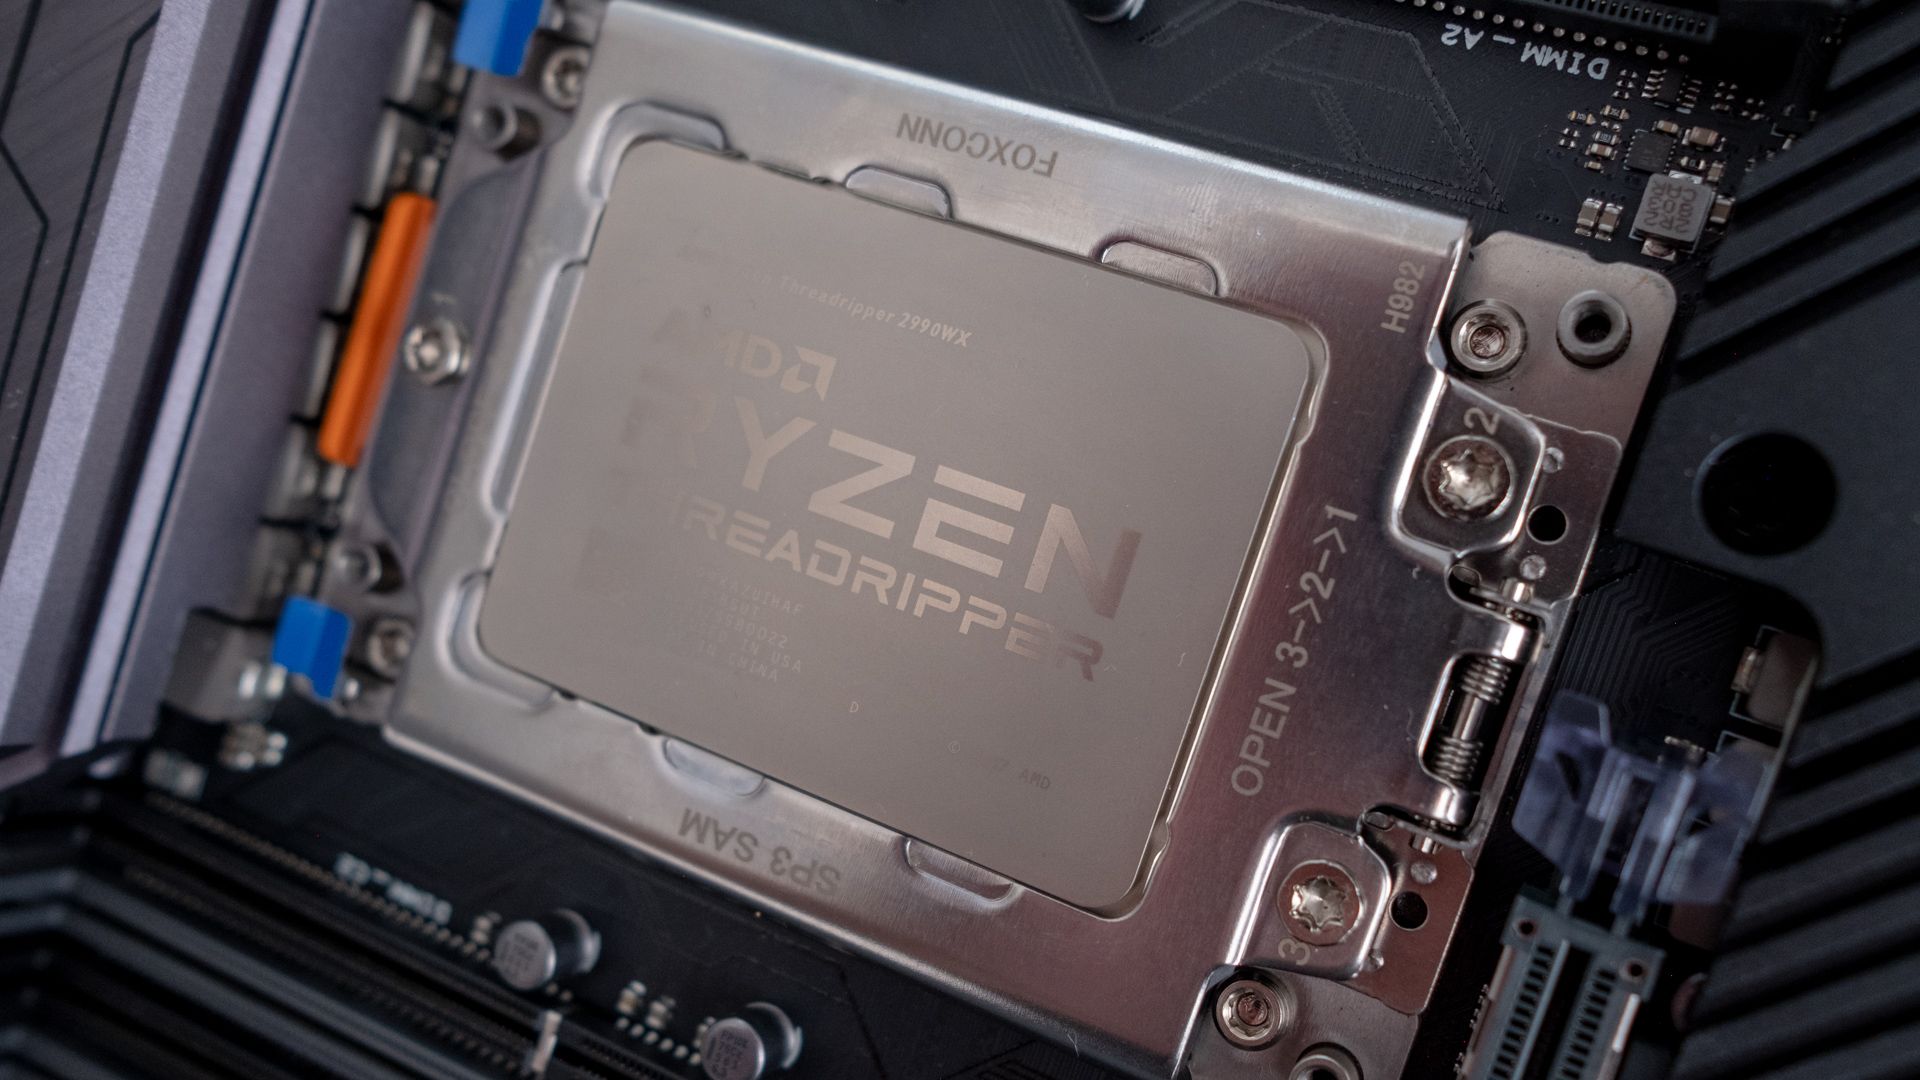 Thought 32 Cores Was A Lot? We Might See A 64 Core Ryzen Threadripper 3990X